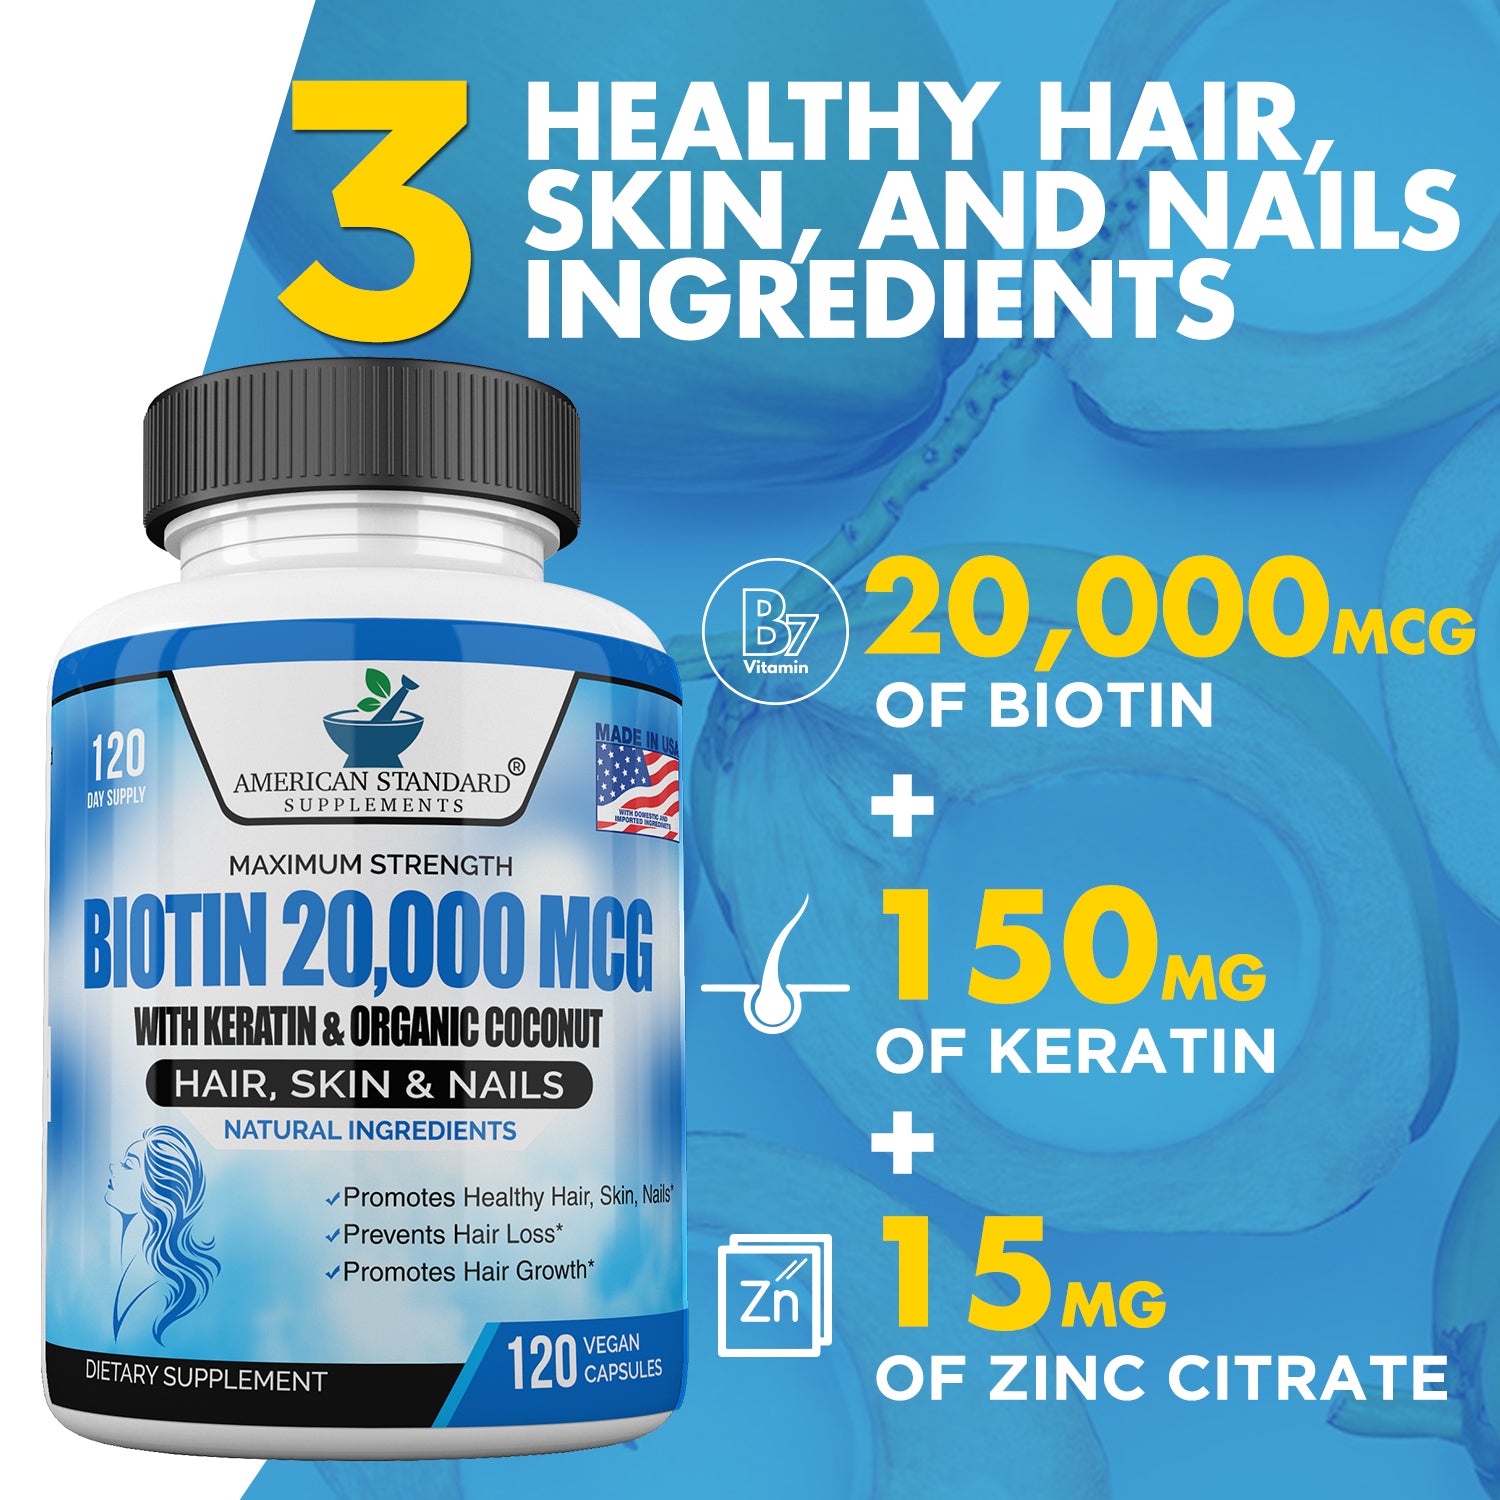 Biotin 20000mcg with Keratin, Organic Coconut and Zinc, Hair Growth Supplements, Biotin Supplements, Healthy Hair Skin & Nails for Adults, No Filler, No Stearate, 120 Vegan Capsules, 120 Day Supply - American Standard Supplements